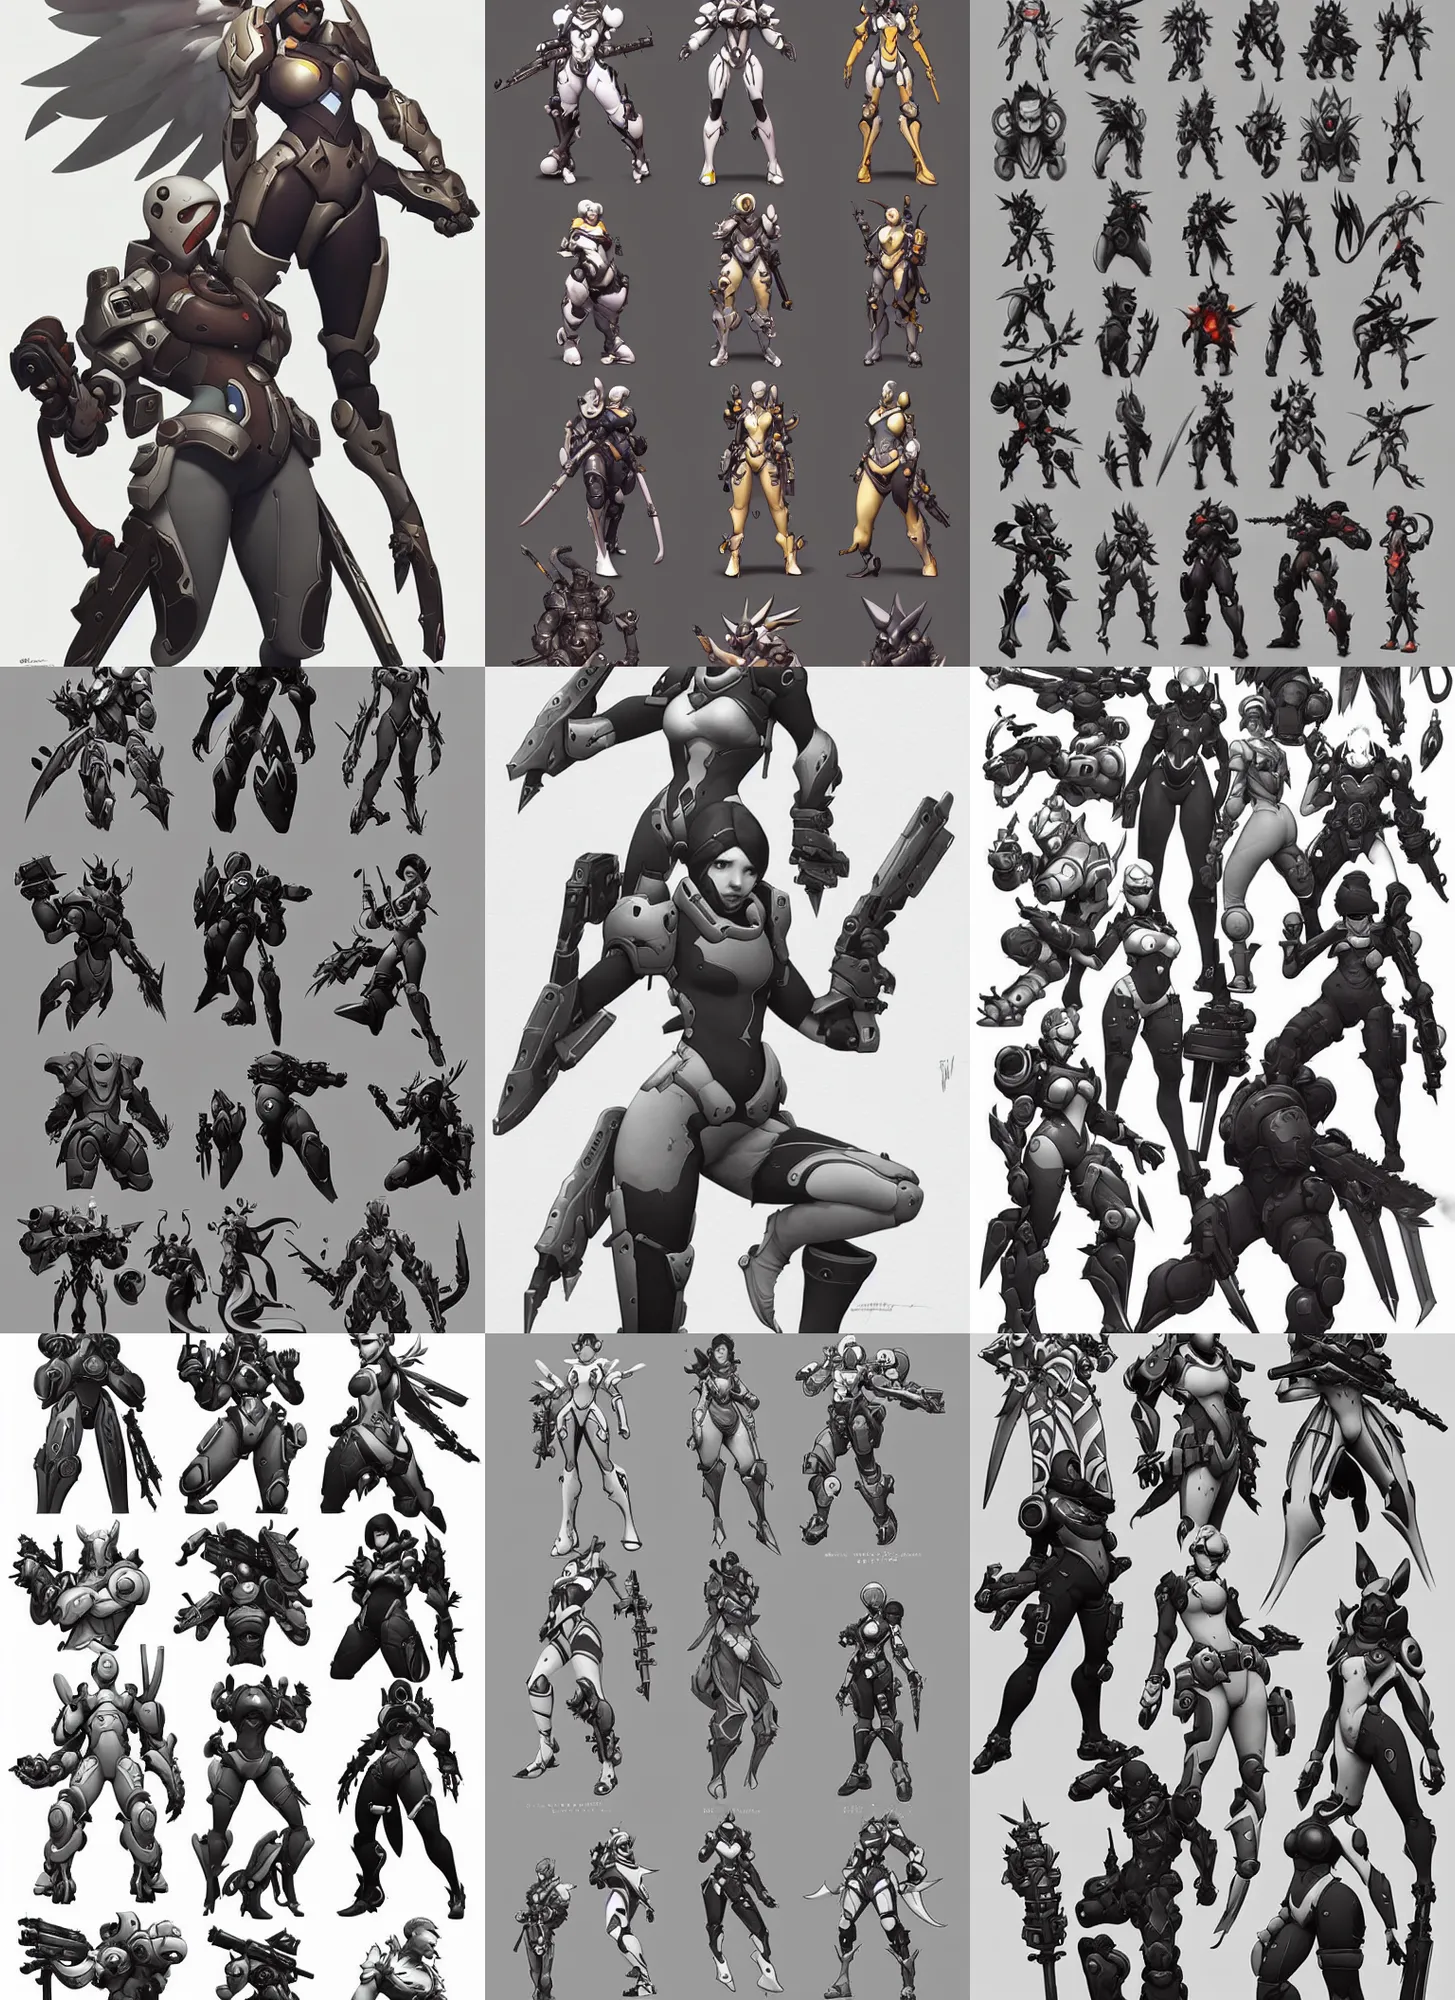 Prompt: detailed pencil spot illustrations of various character concepts from the overwatch and destiny crossover, various poses, by burne hogarth, by bridgeman, by anthony ryder, by yoshitaka amano, by ruan jia, by conrad roset, by mucha, cgsociety, artstation.